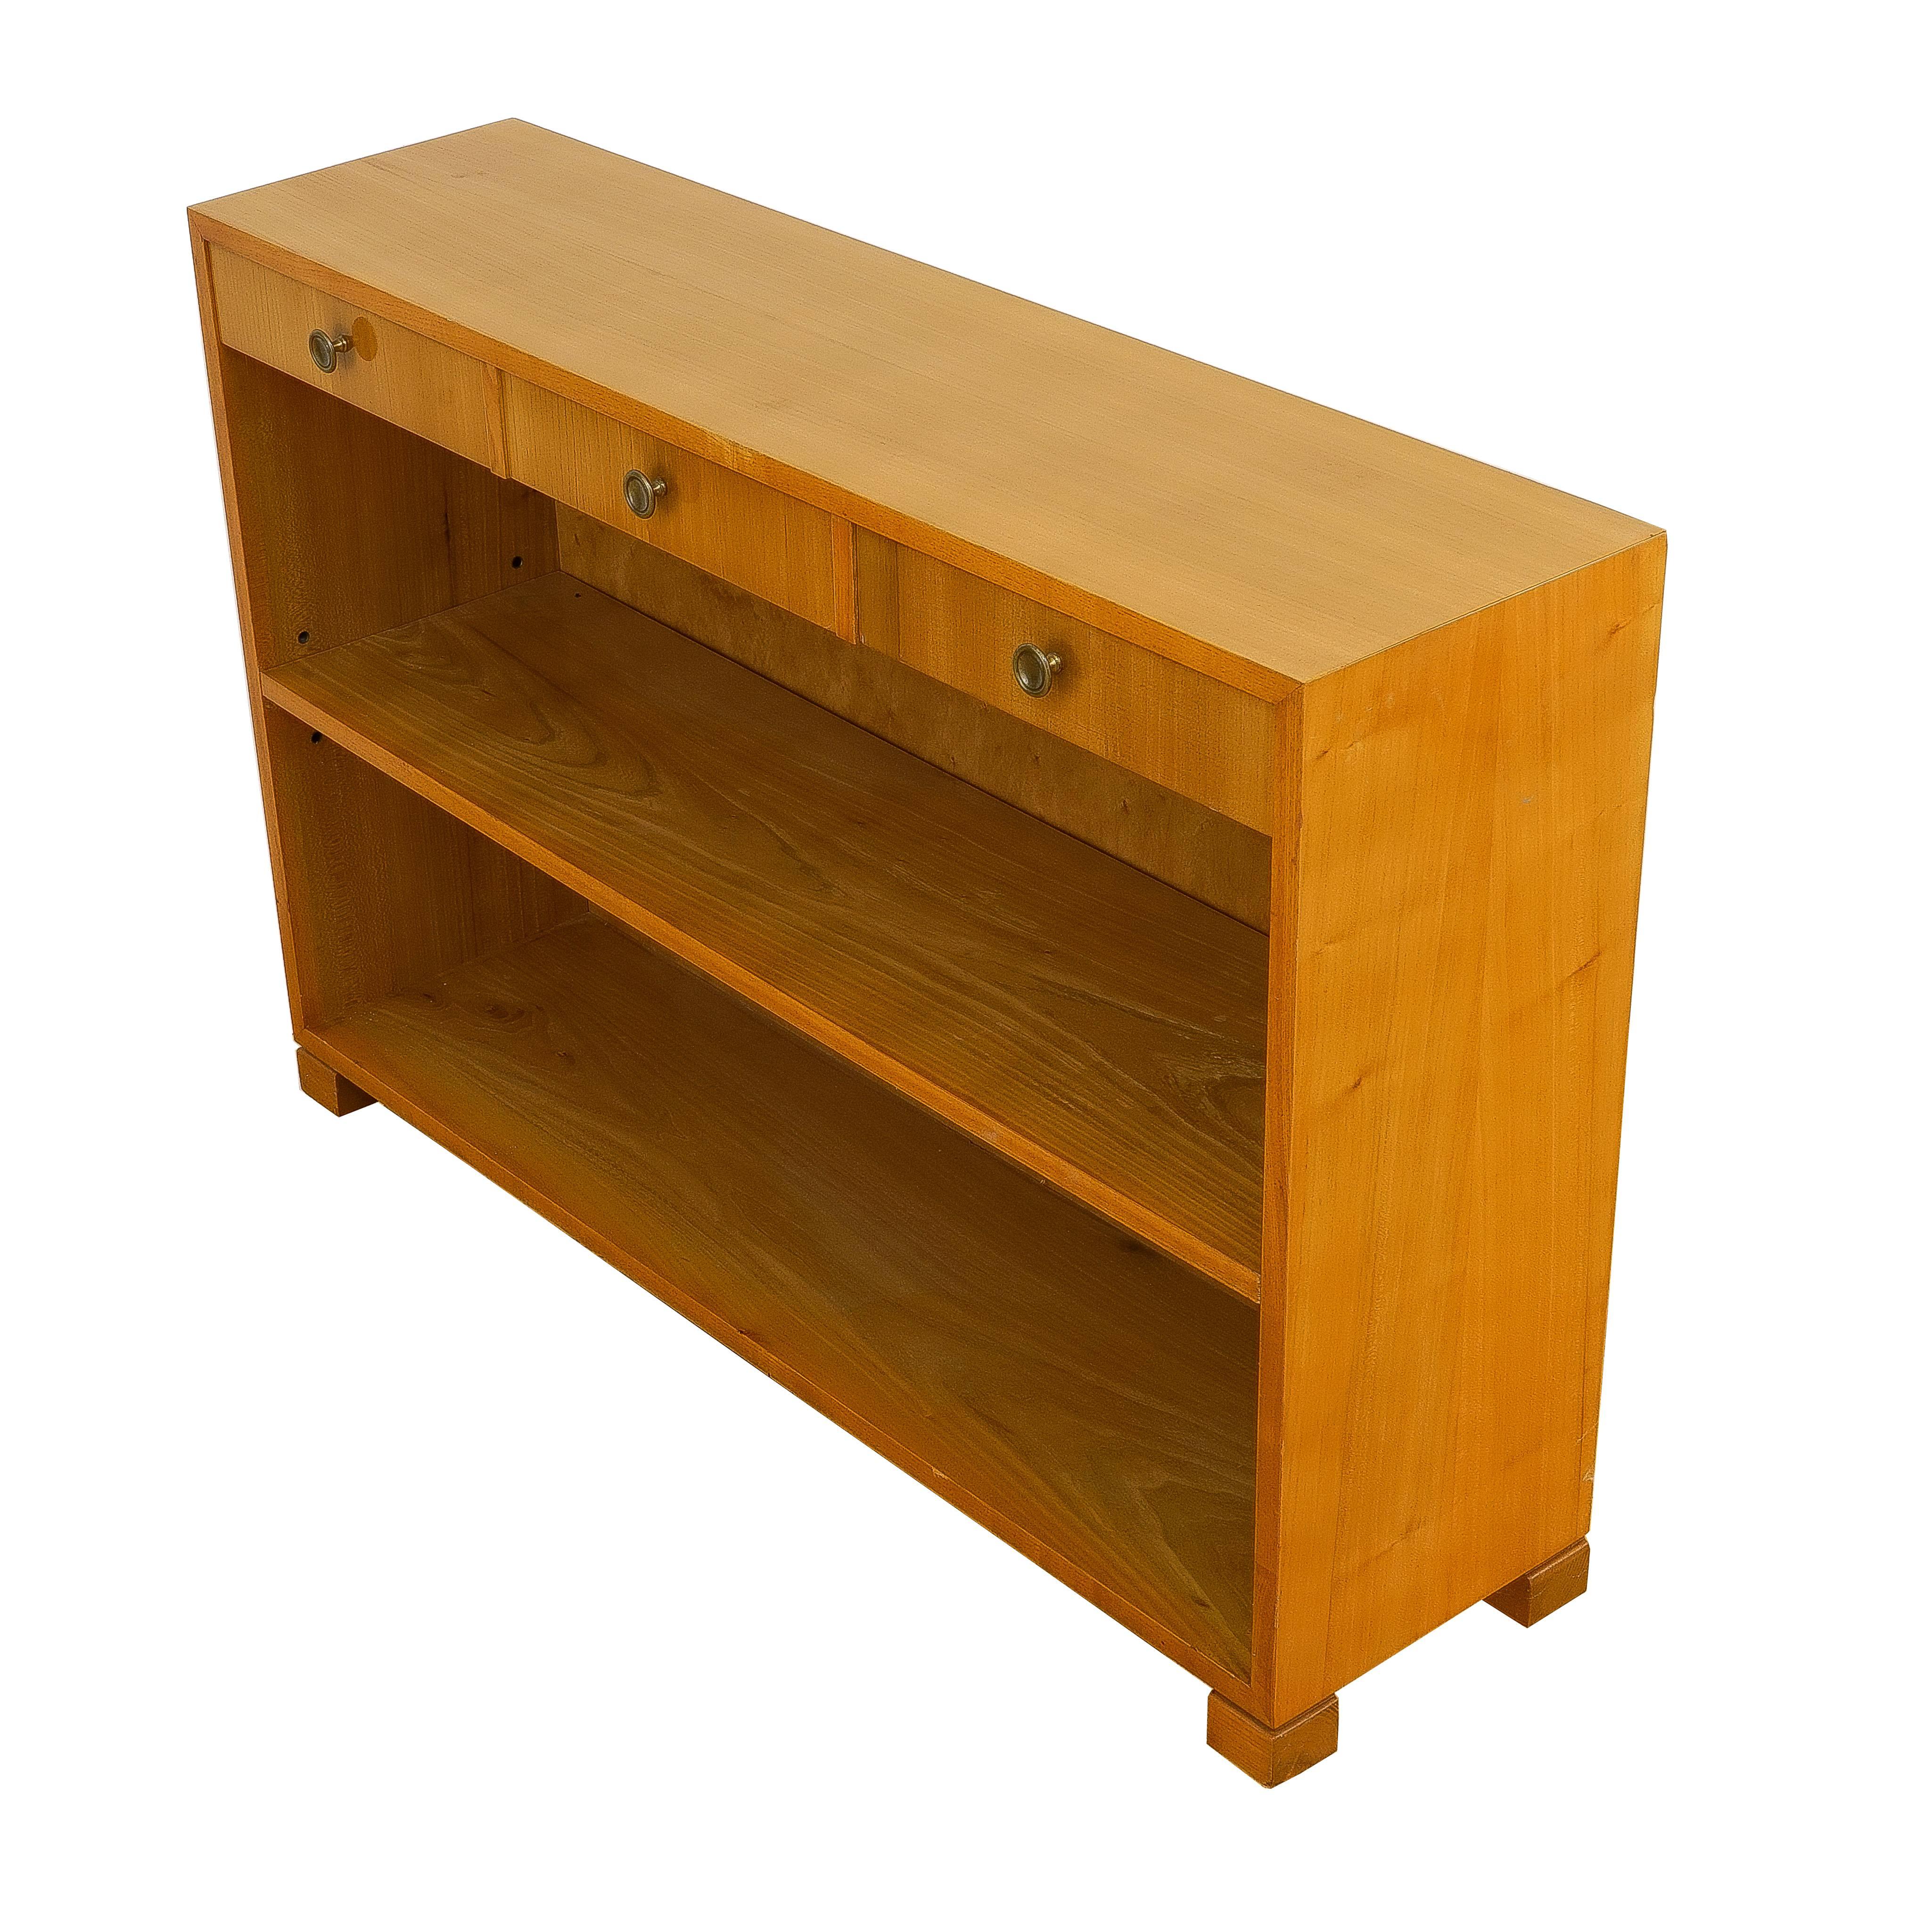 Functional and space efficient, this console performs many duties, storing books and gloves, check book and keys, photo display for a hall, or as serving space for a small kitchen or dining area. Crafted of solid ash and fir, the console is